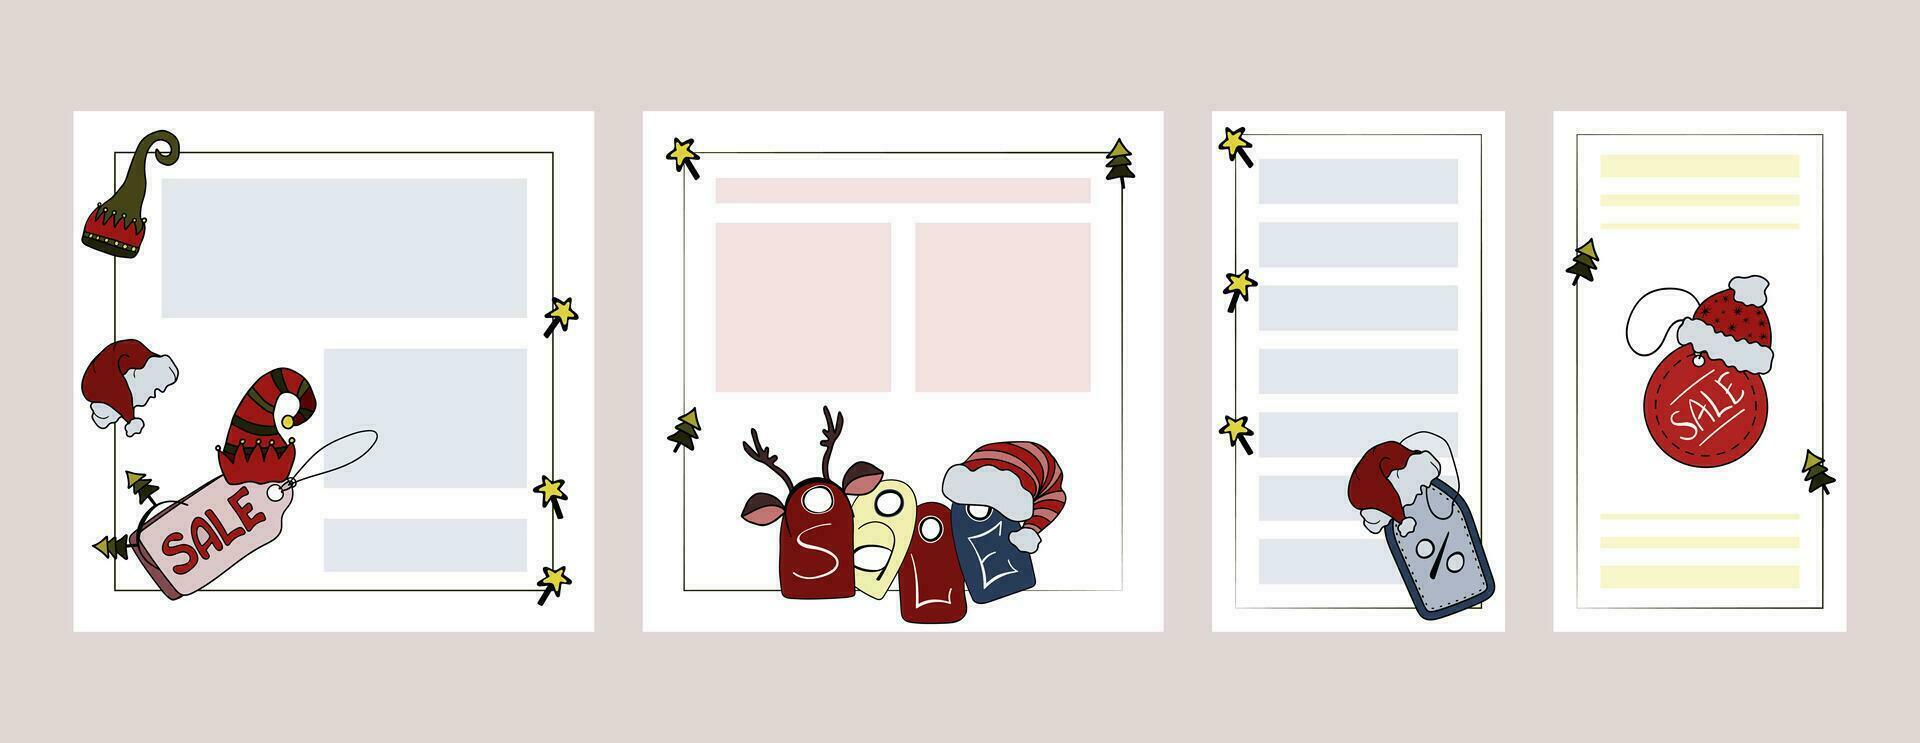 Set of Christmas Sales templates for banner posts, stories, invitations, greeting cards with copy space. Cute various price tags with Santa hats, elf hats, toy reindeer horns, Christmas tree headband. vector